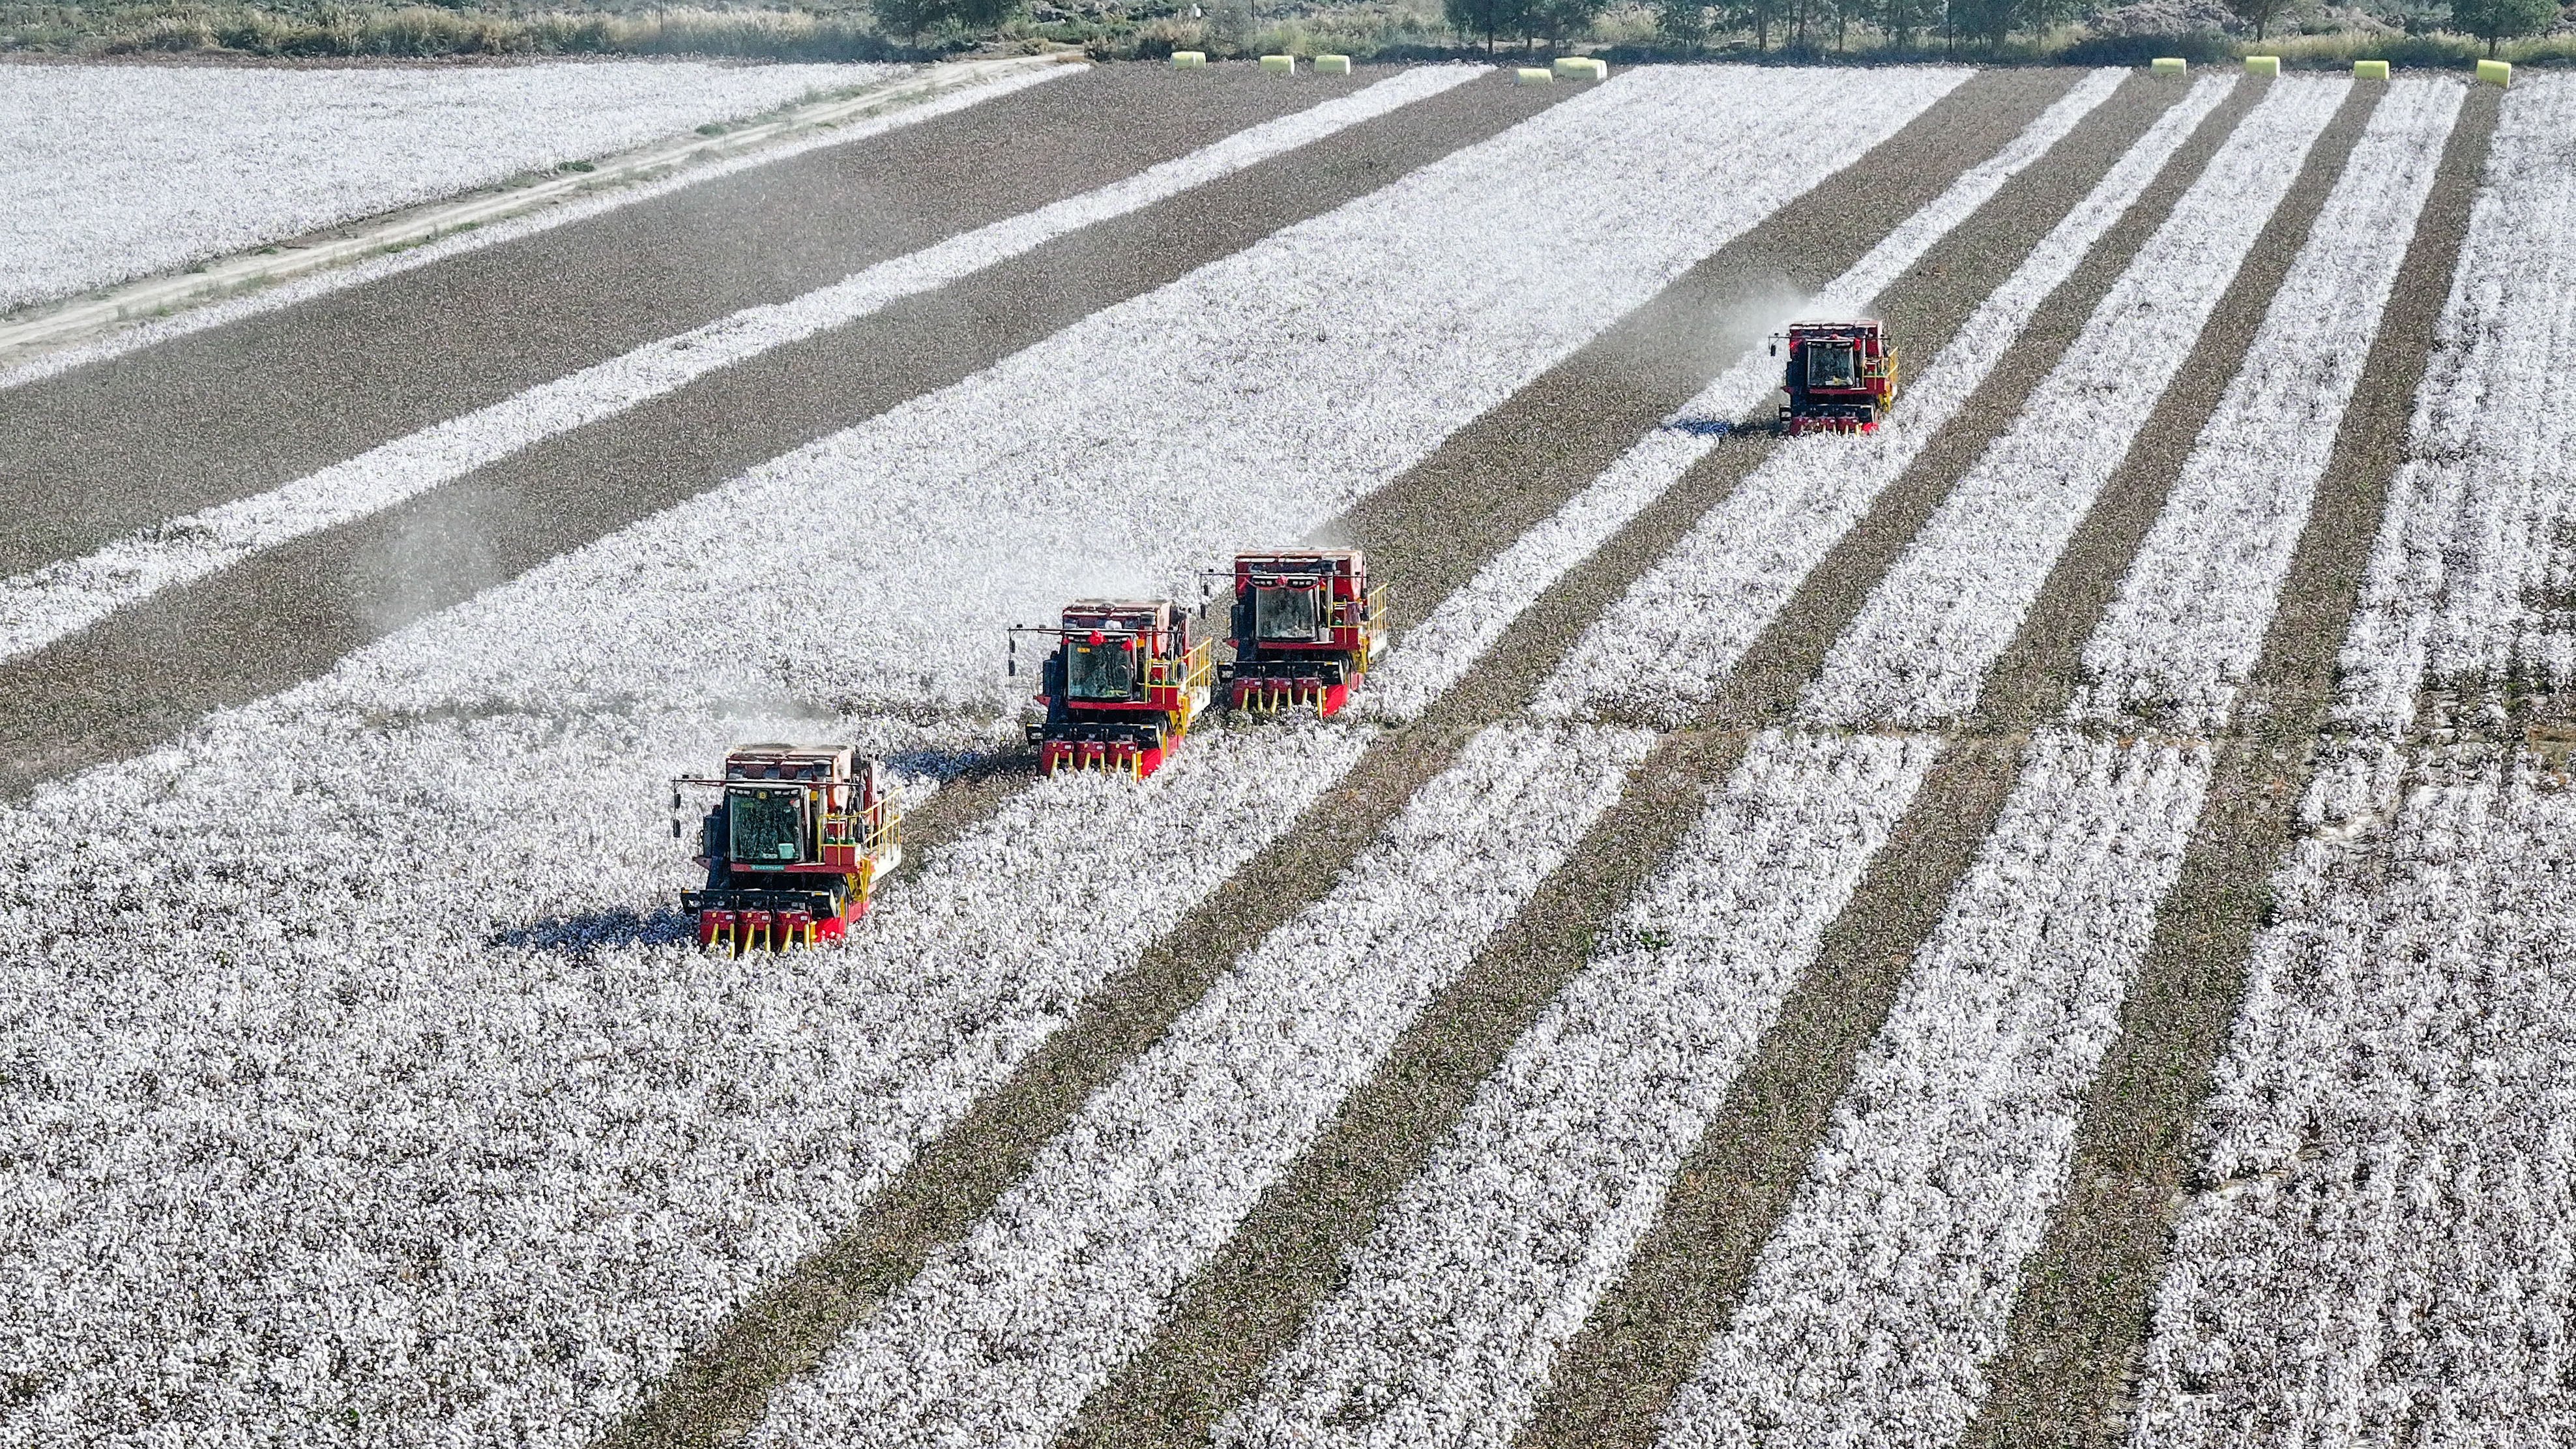 UK authorities must reconsider whether to open a probe into the import of cotton allegedly produced by slave labour in Xinjiang, a London court ruled. Photo: Xinhua